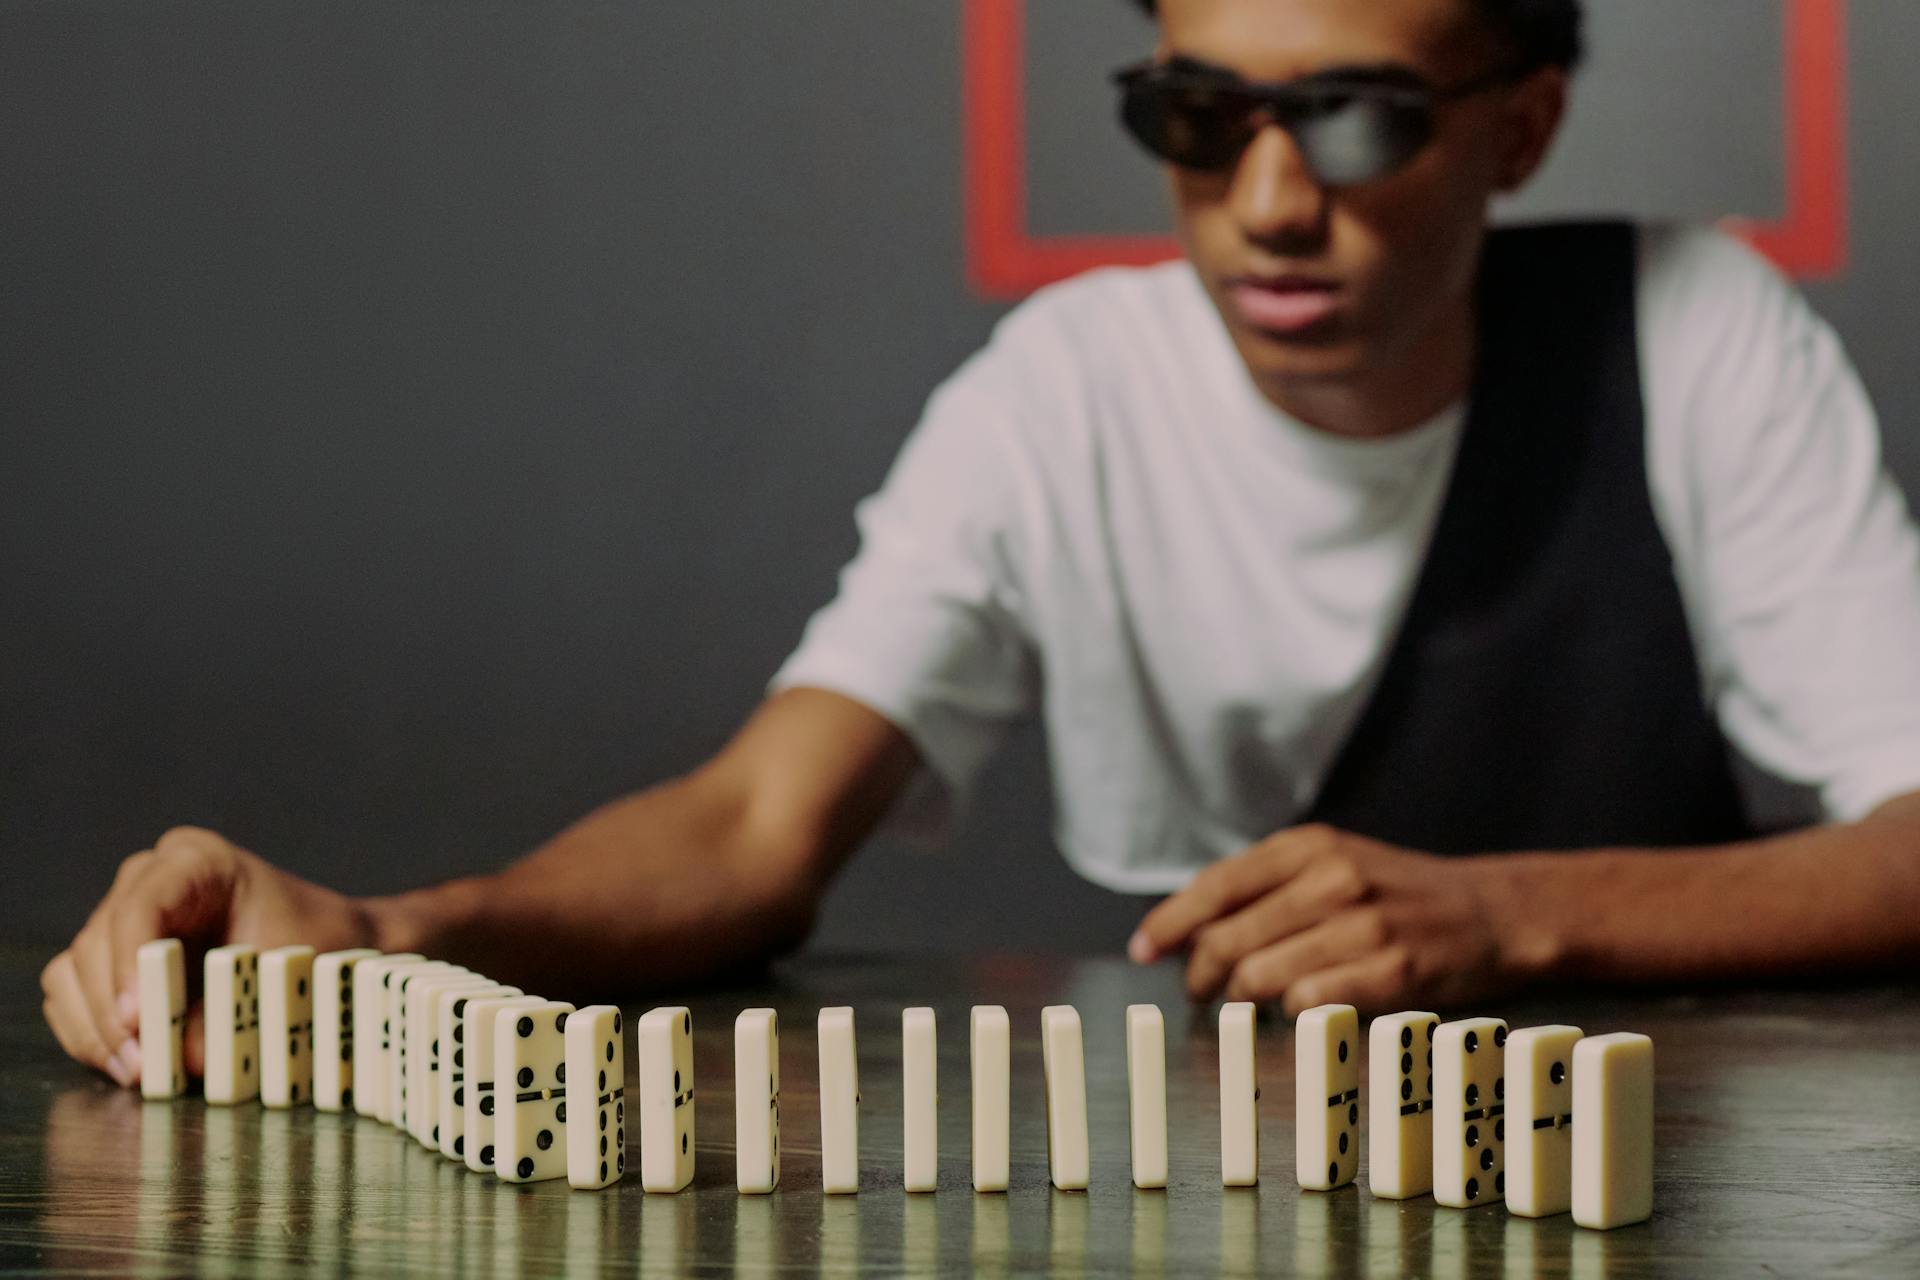 Man sitting and taking one of the domino blocks